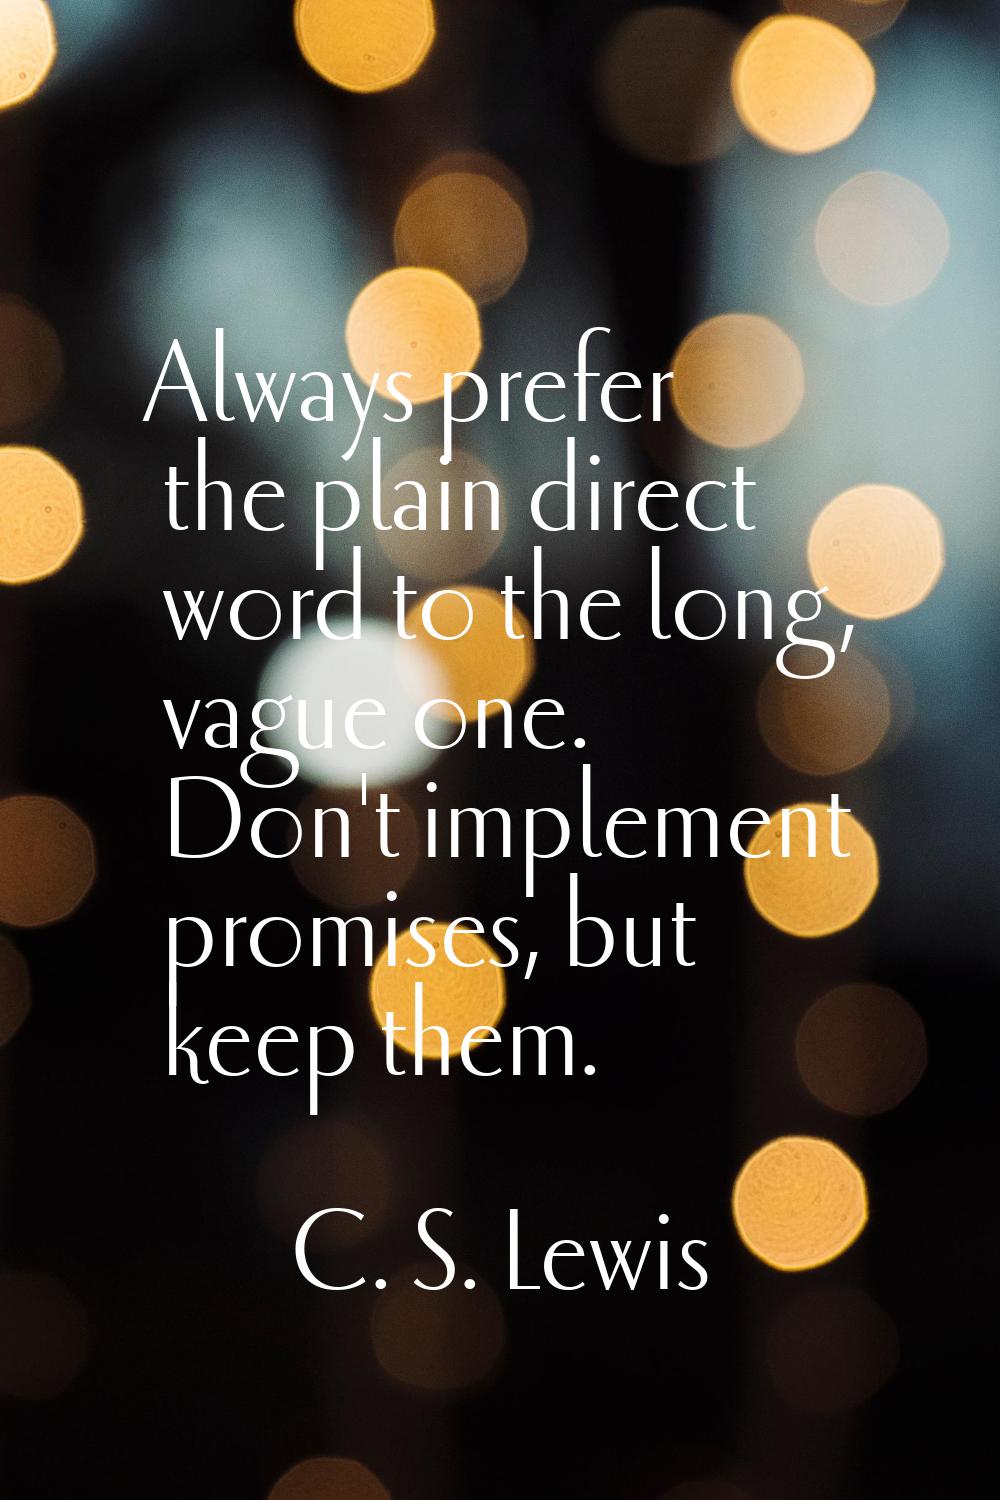 Always prefer the plain direct word to the long, vague one. Don't implement promises, but keep them